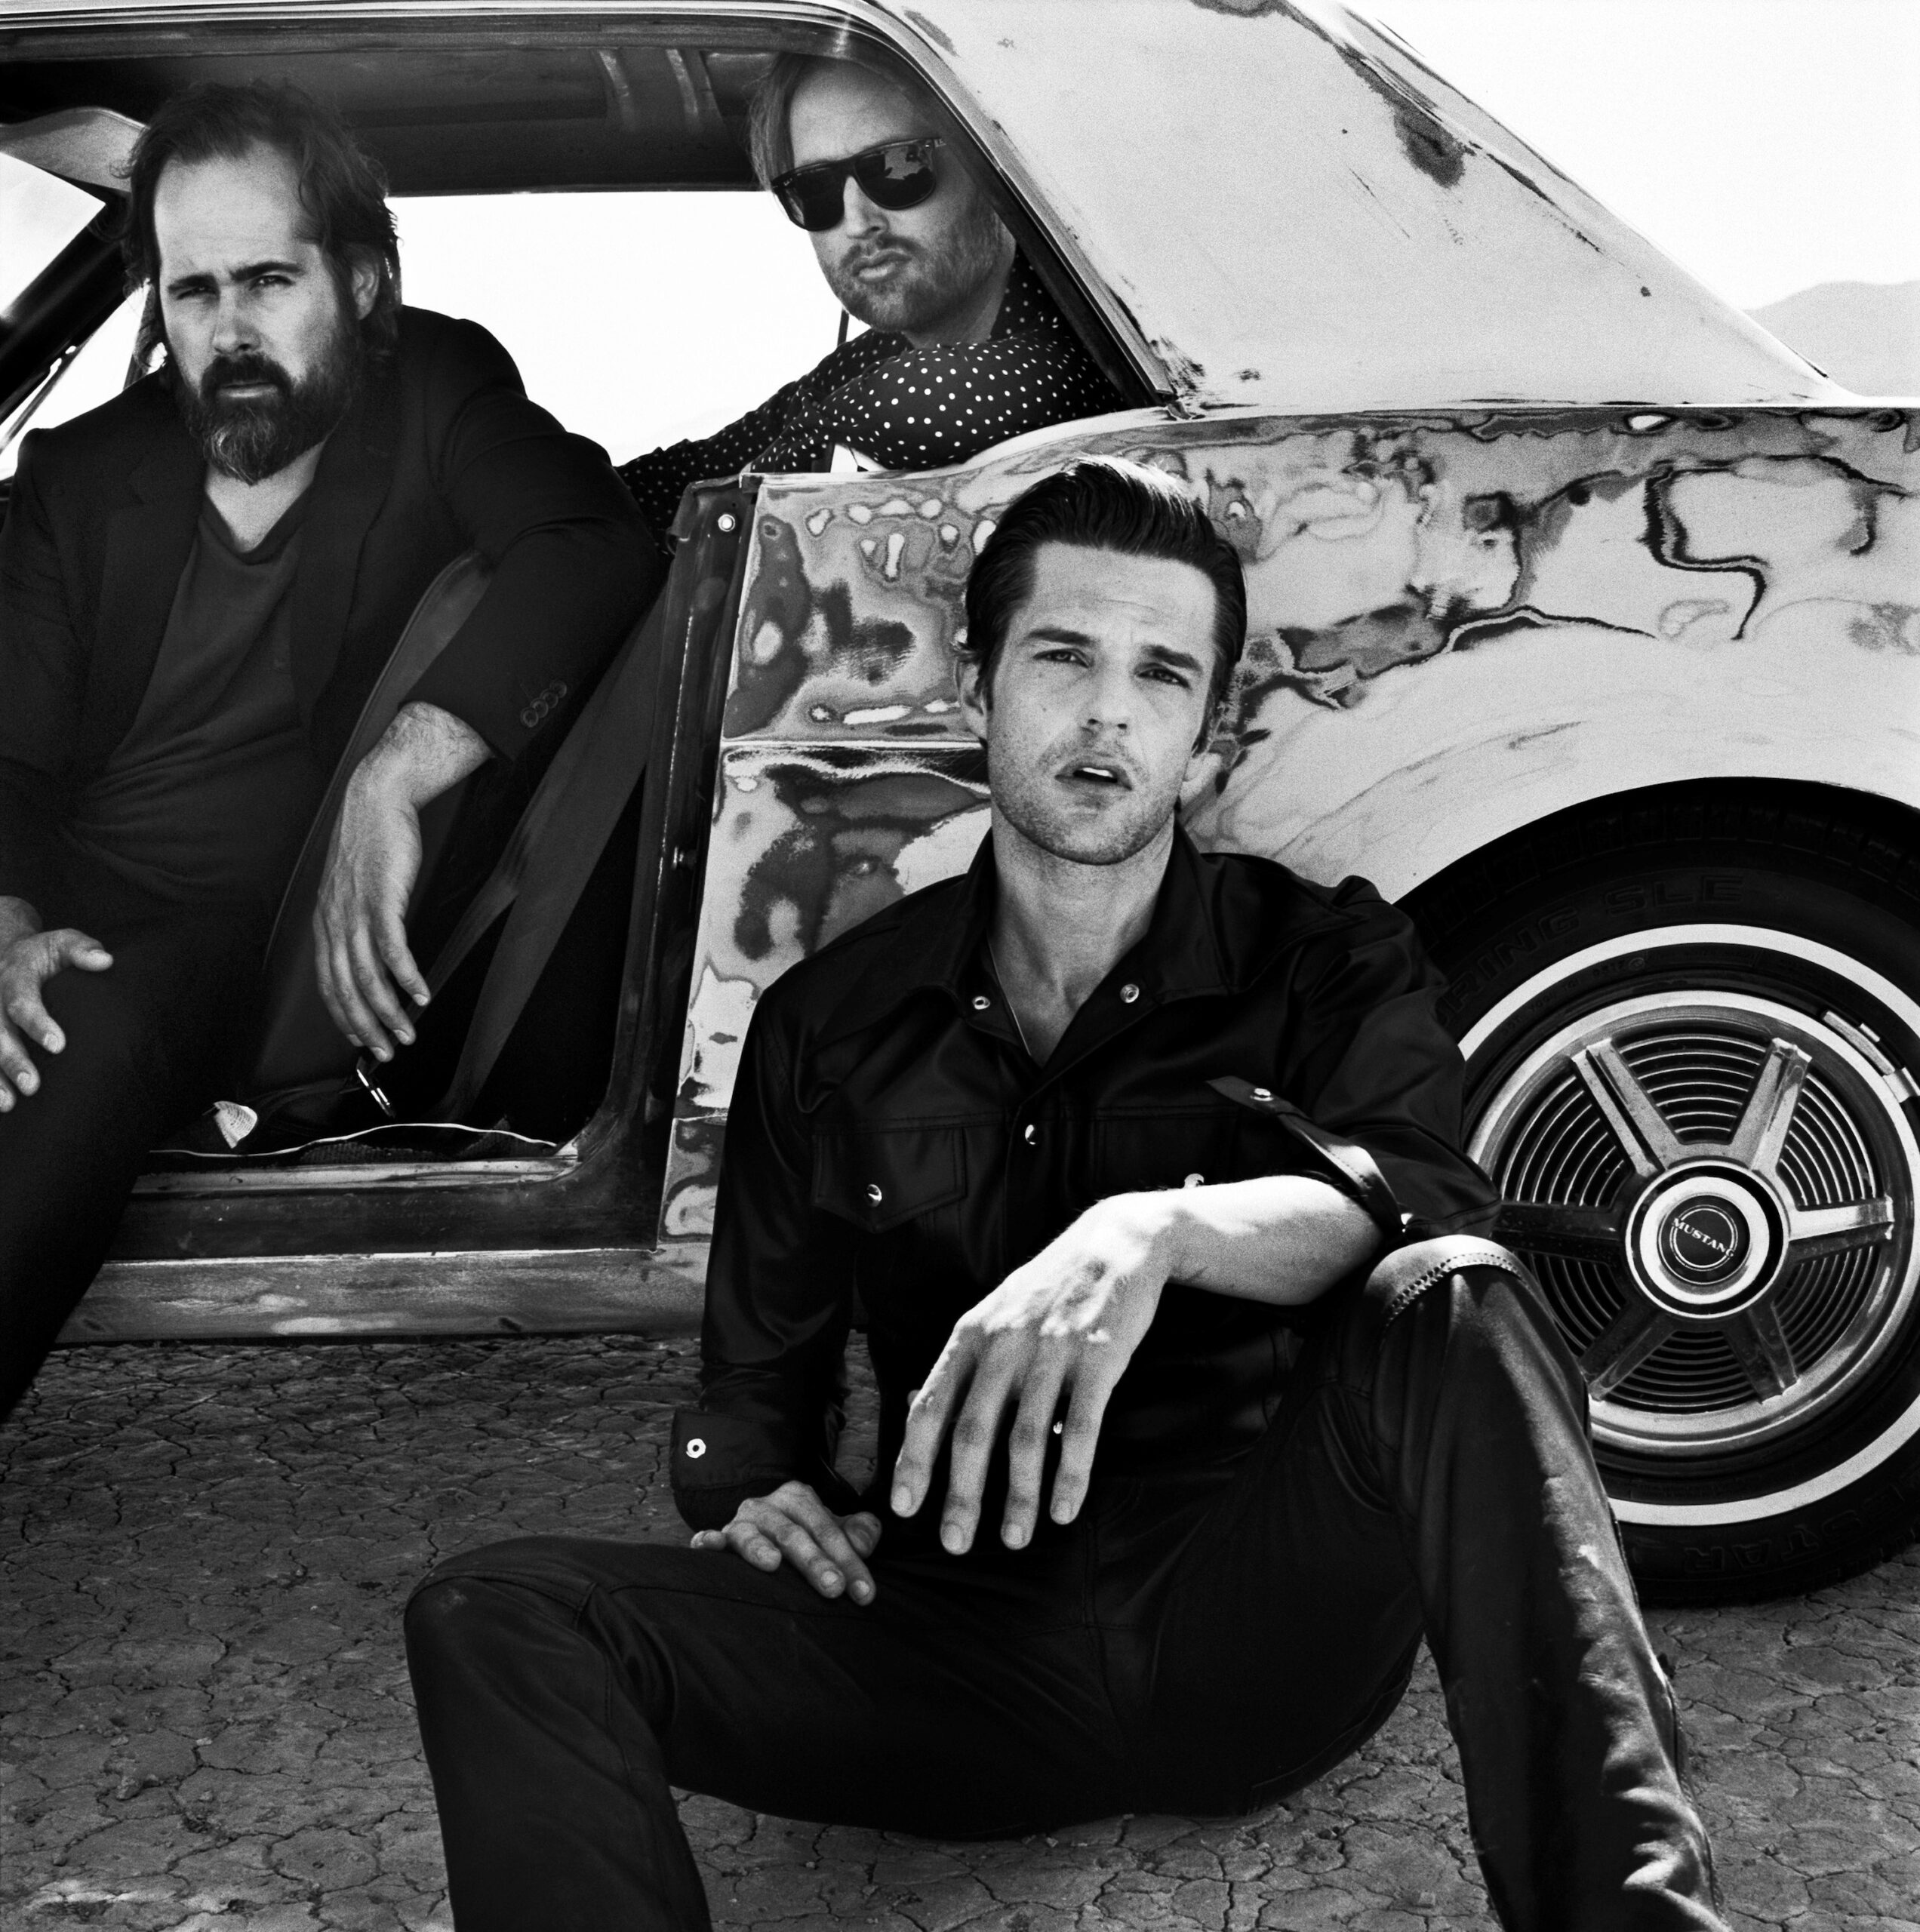 THE KILLERS RETURNING TO AUSTRALIA IN NOVEMBER 2020 ON THEIR IMPLODING THE MIRAGE TOUR + BRAND NEW SINGLE ‘CAUTION’ RELEASED TODAY